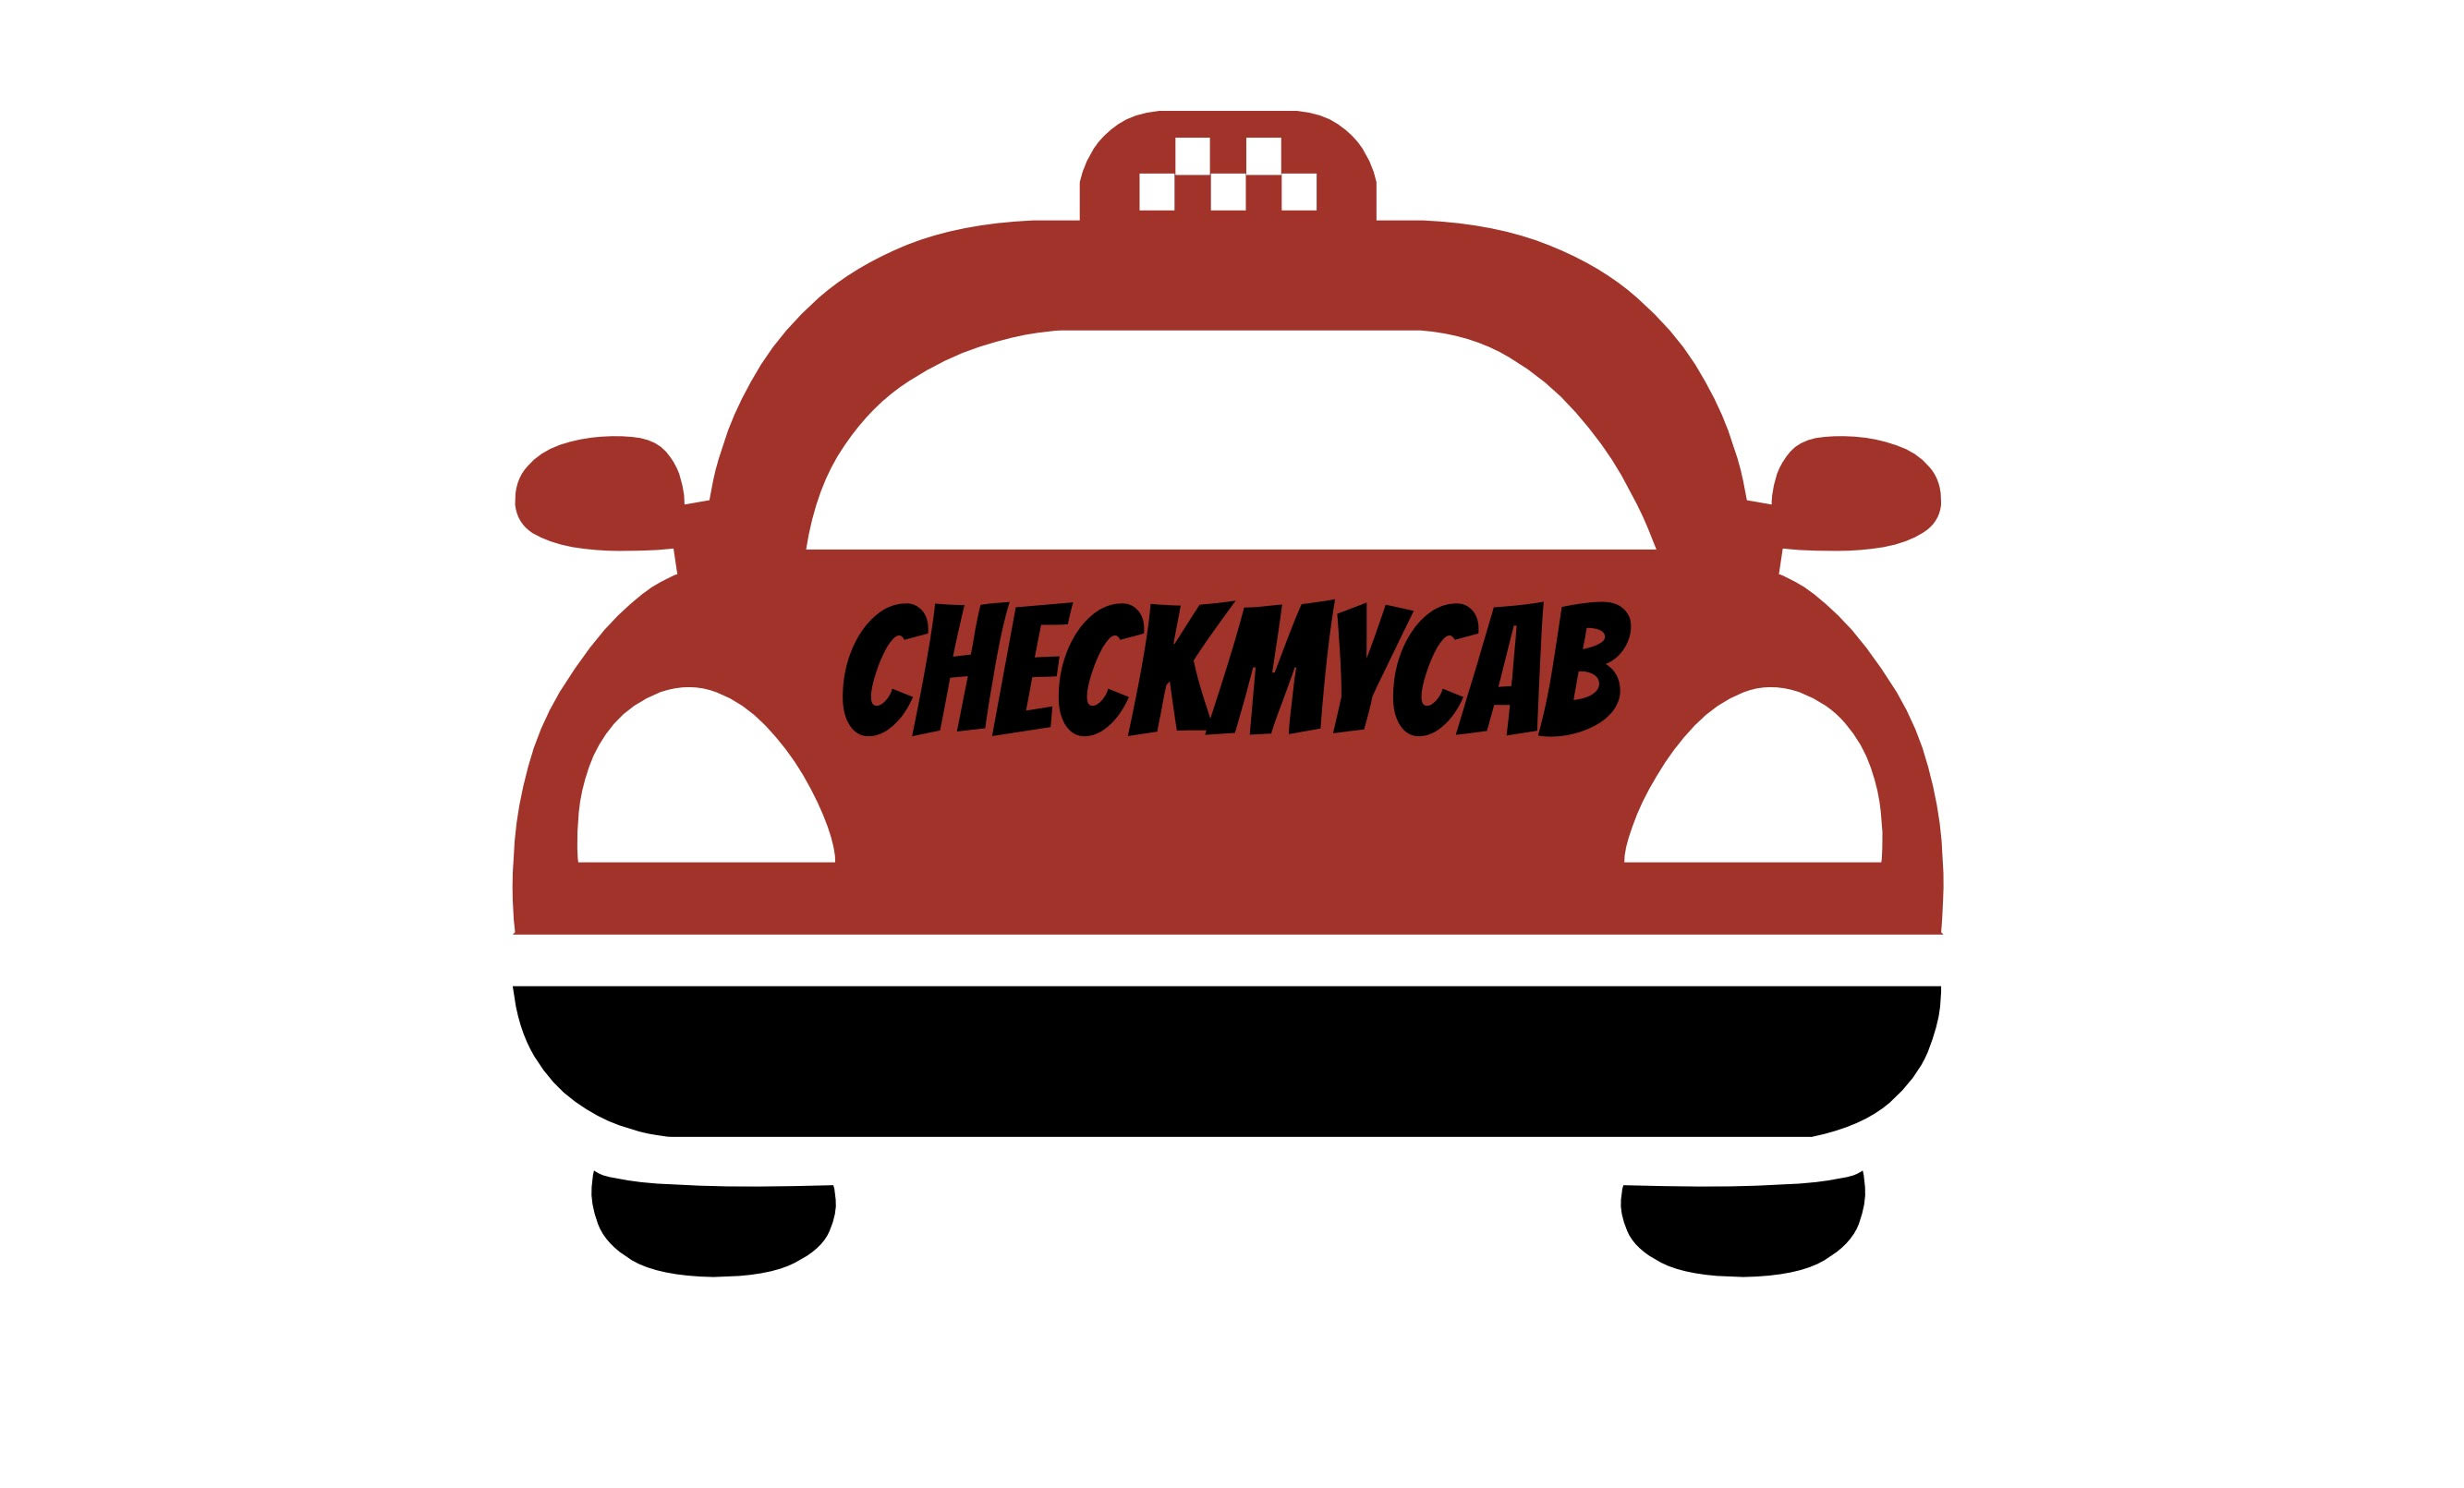 Checkmycab - application S.C.O. Services Chauffeurs Occasionnels